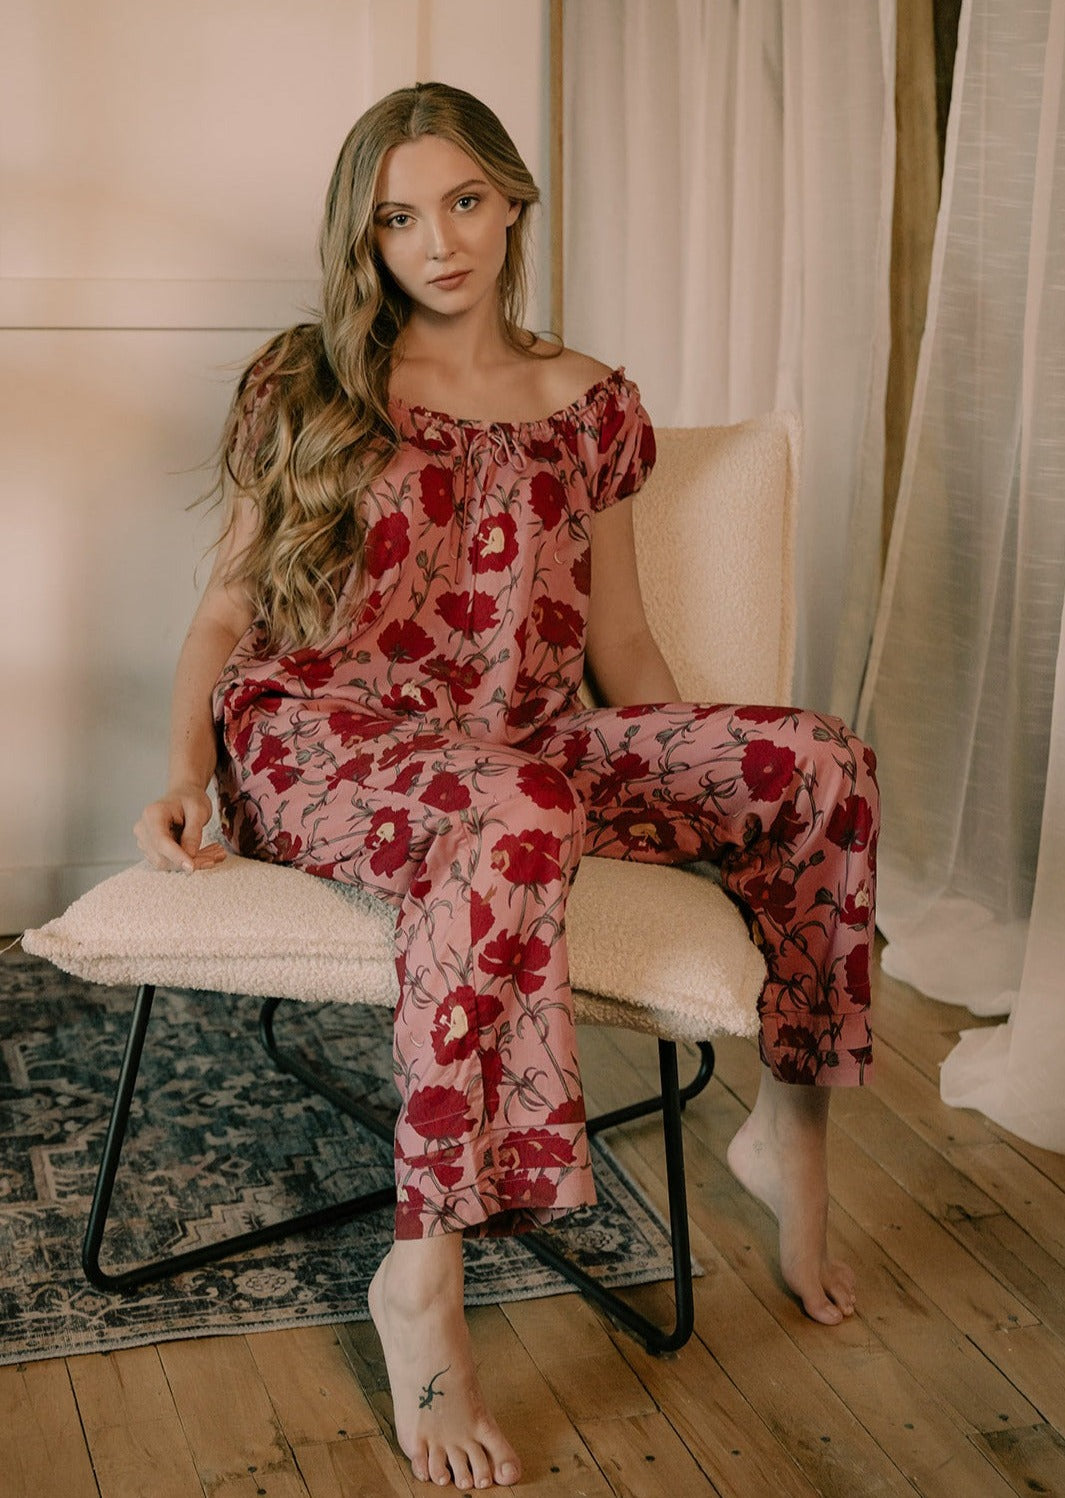 Till Blush Of Night luxury loungewear / pyjama short-sleeved blouse style made out of lightweight Tencel eco-friendly fabric in pink and red colorway 